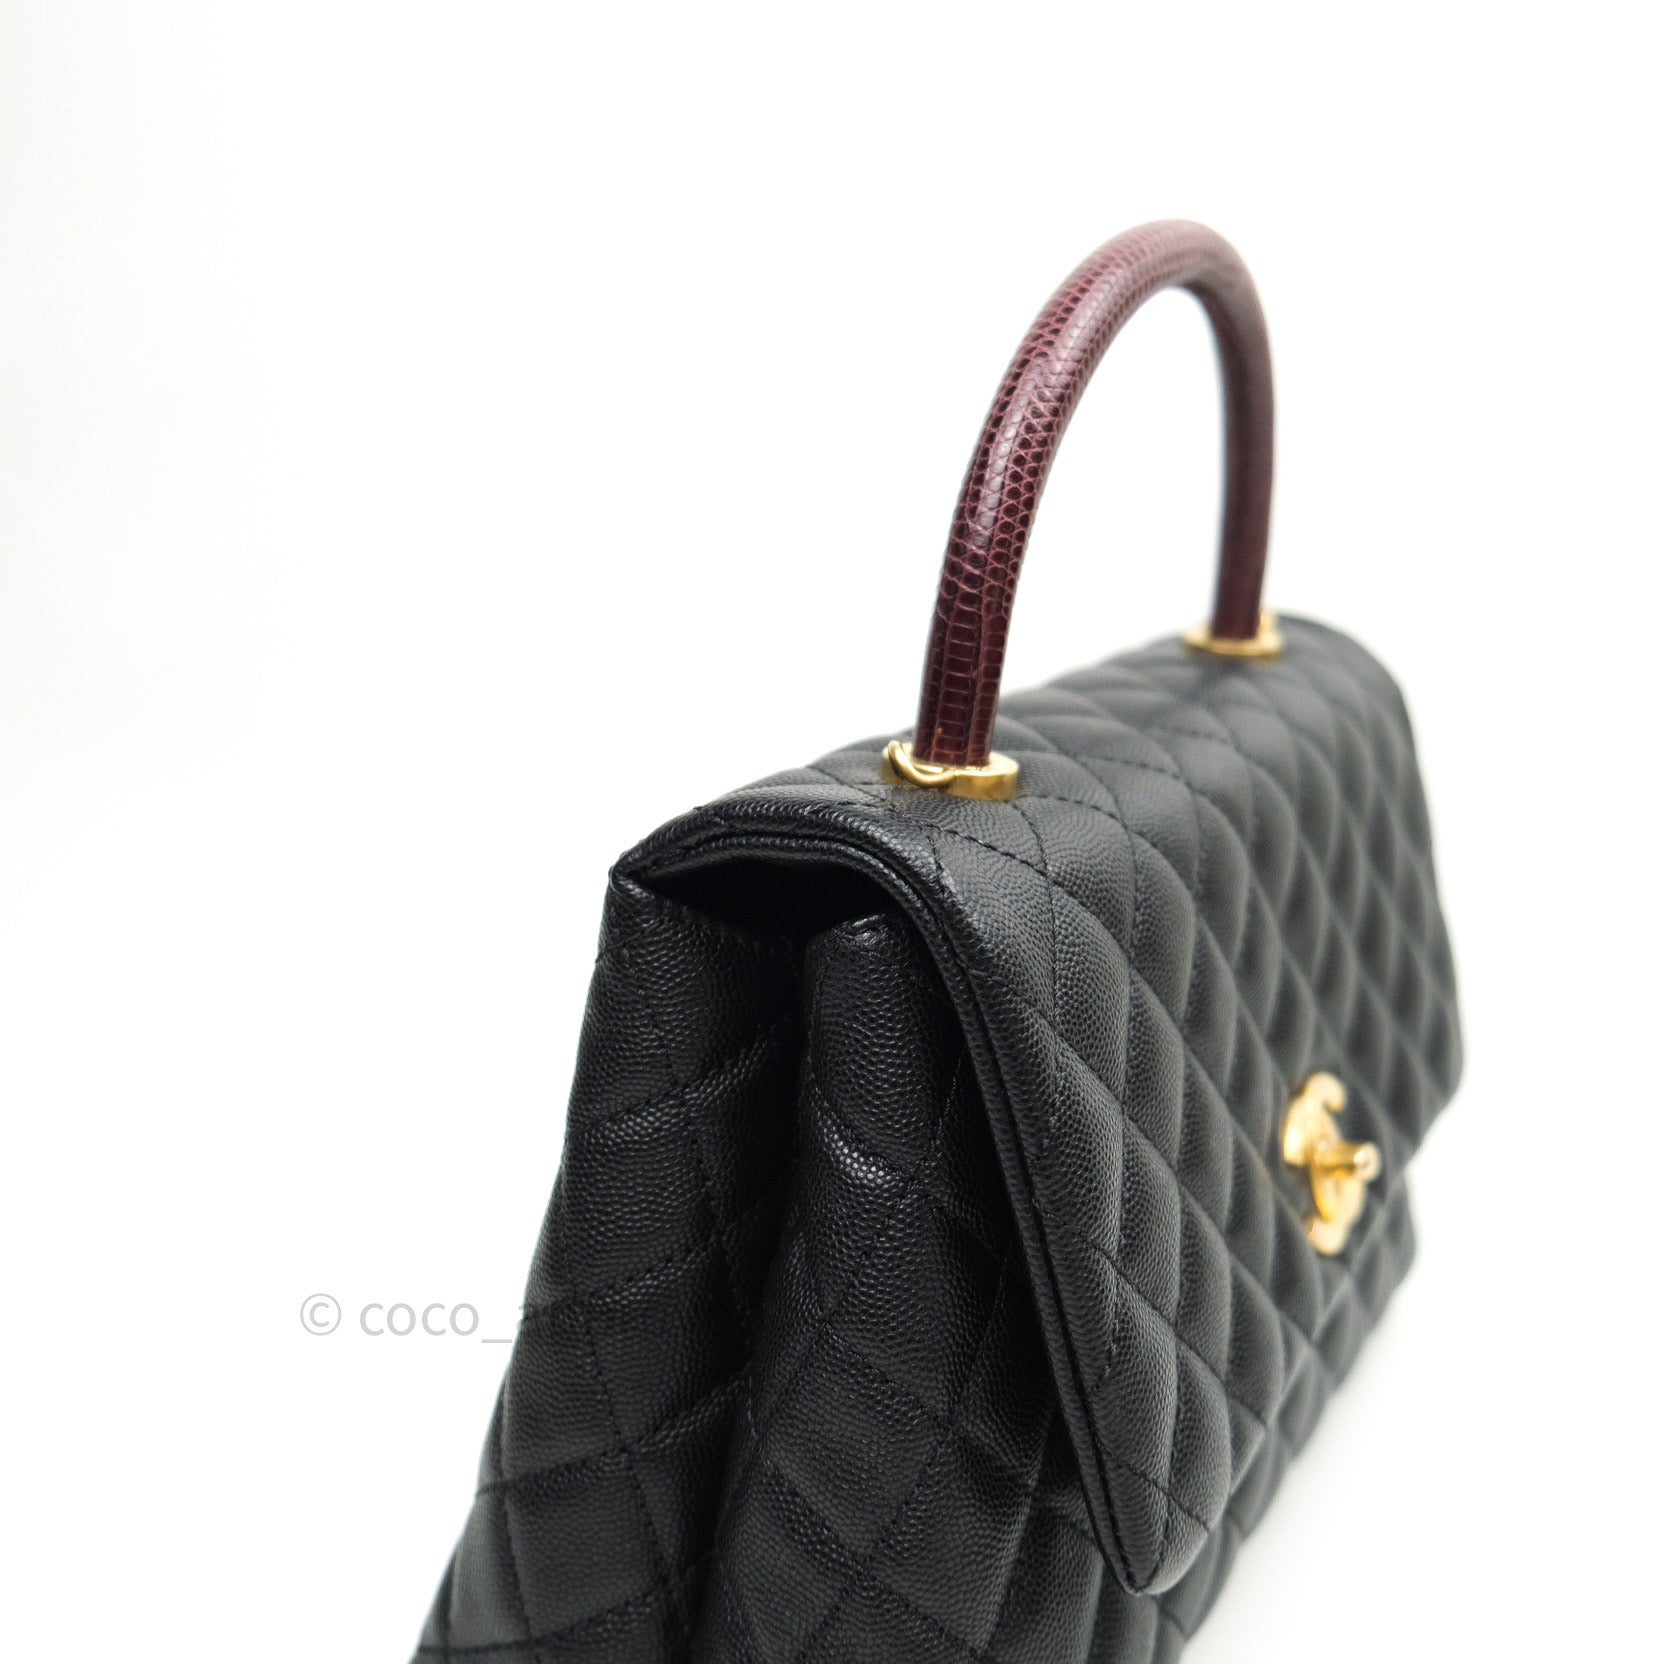 Real Luxe - Chanel Coco Handle Small Size. This bag is very hard